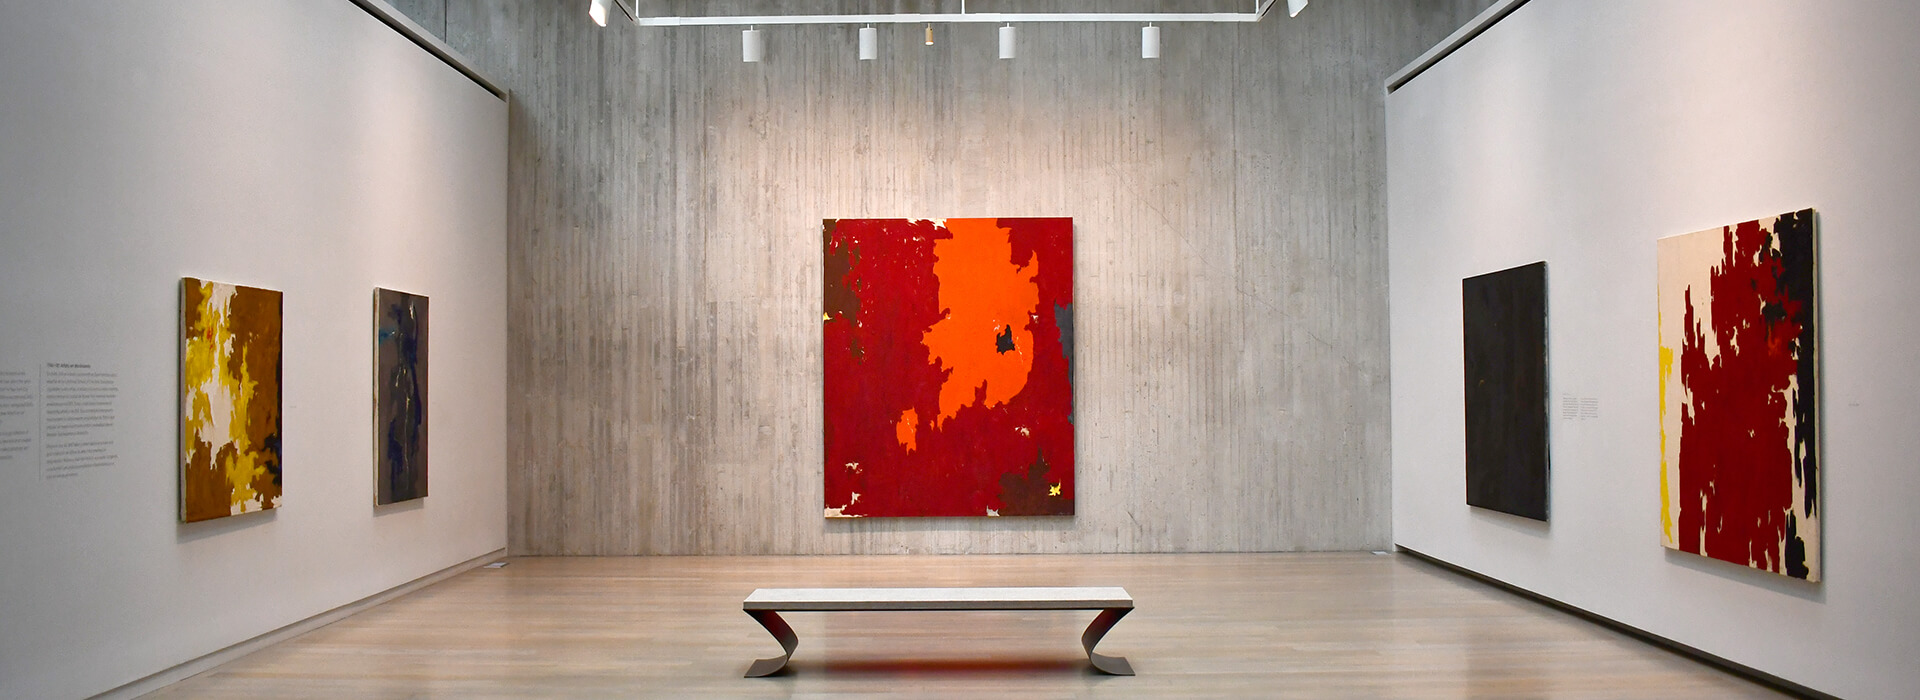 An empty gallery with large, colorful abstract paintings on the walls